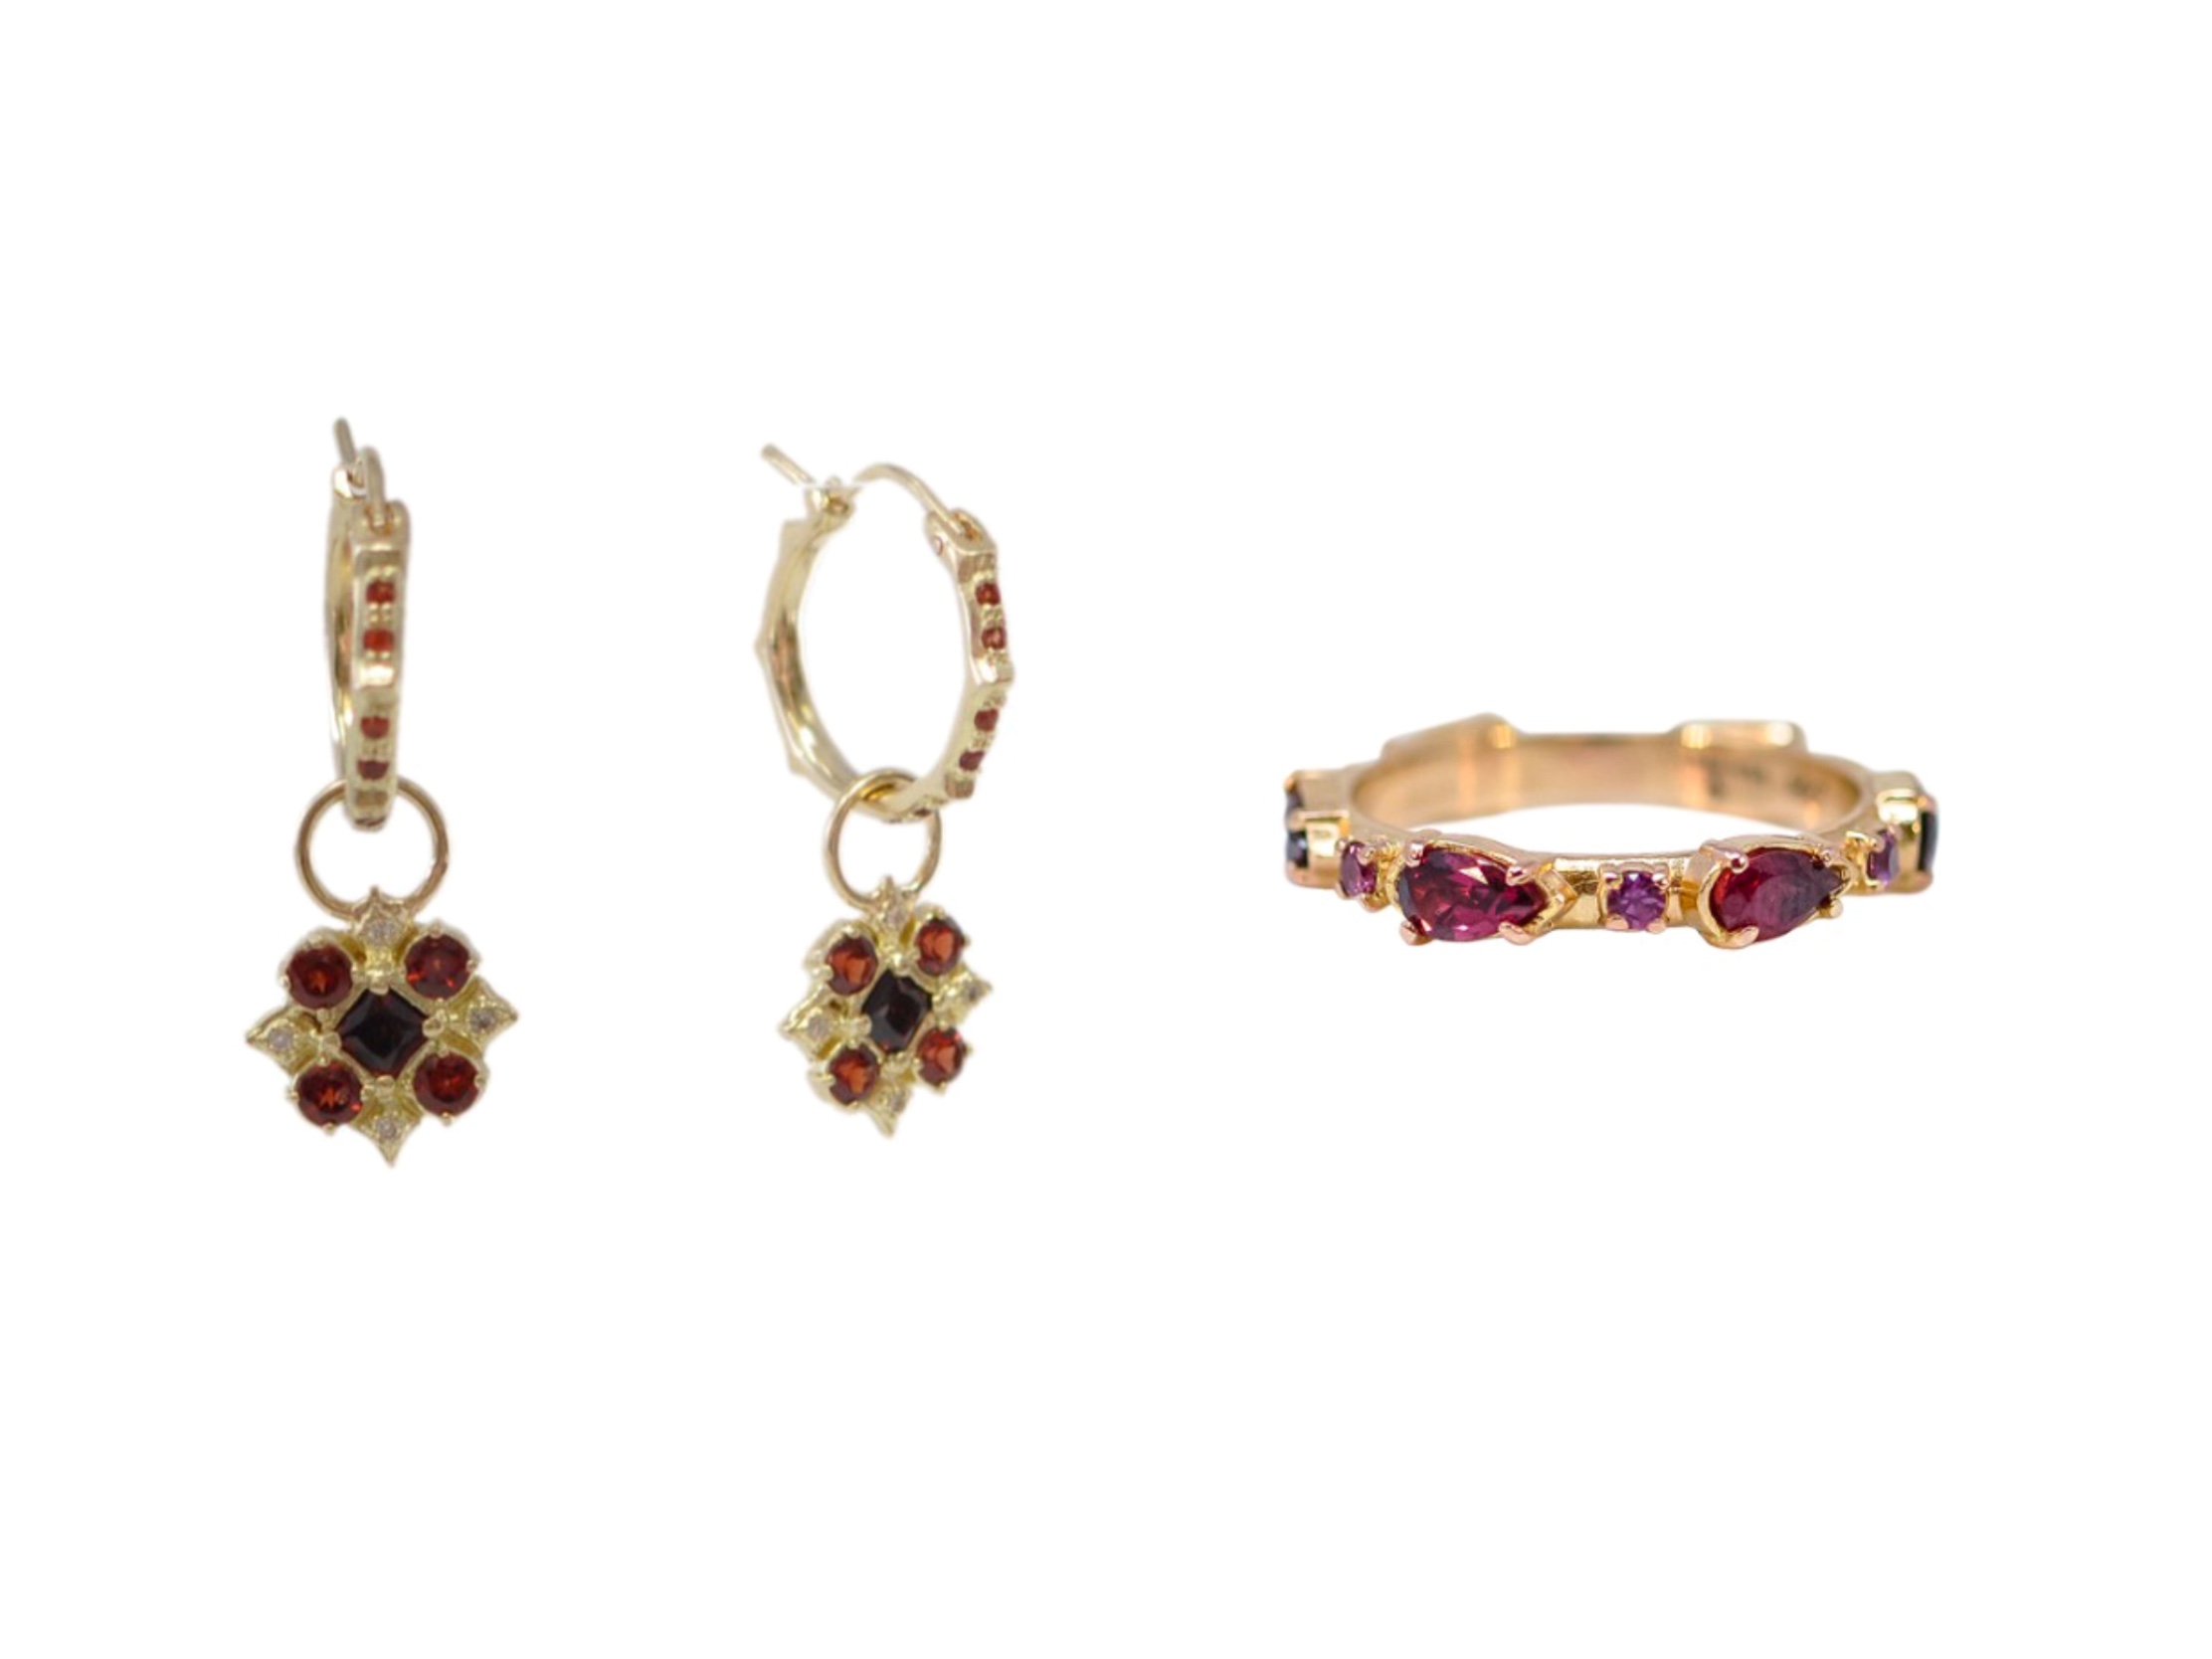 Stunningly Scarlett Garnet Pear Cut Stack Band and Maltese Cross Drop Earrings by Armenta, available at Deutsch Fine Jewelry in Houston, Texas.